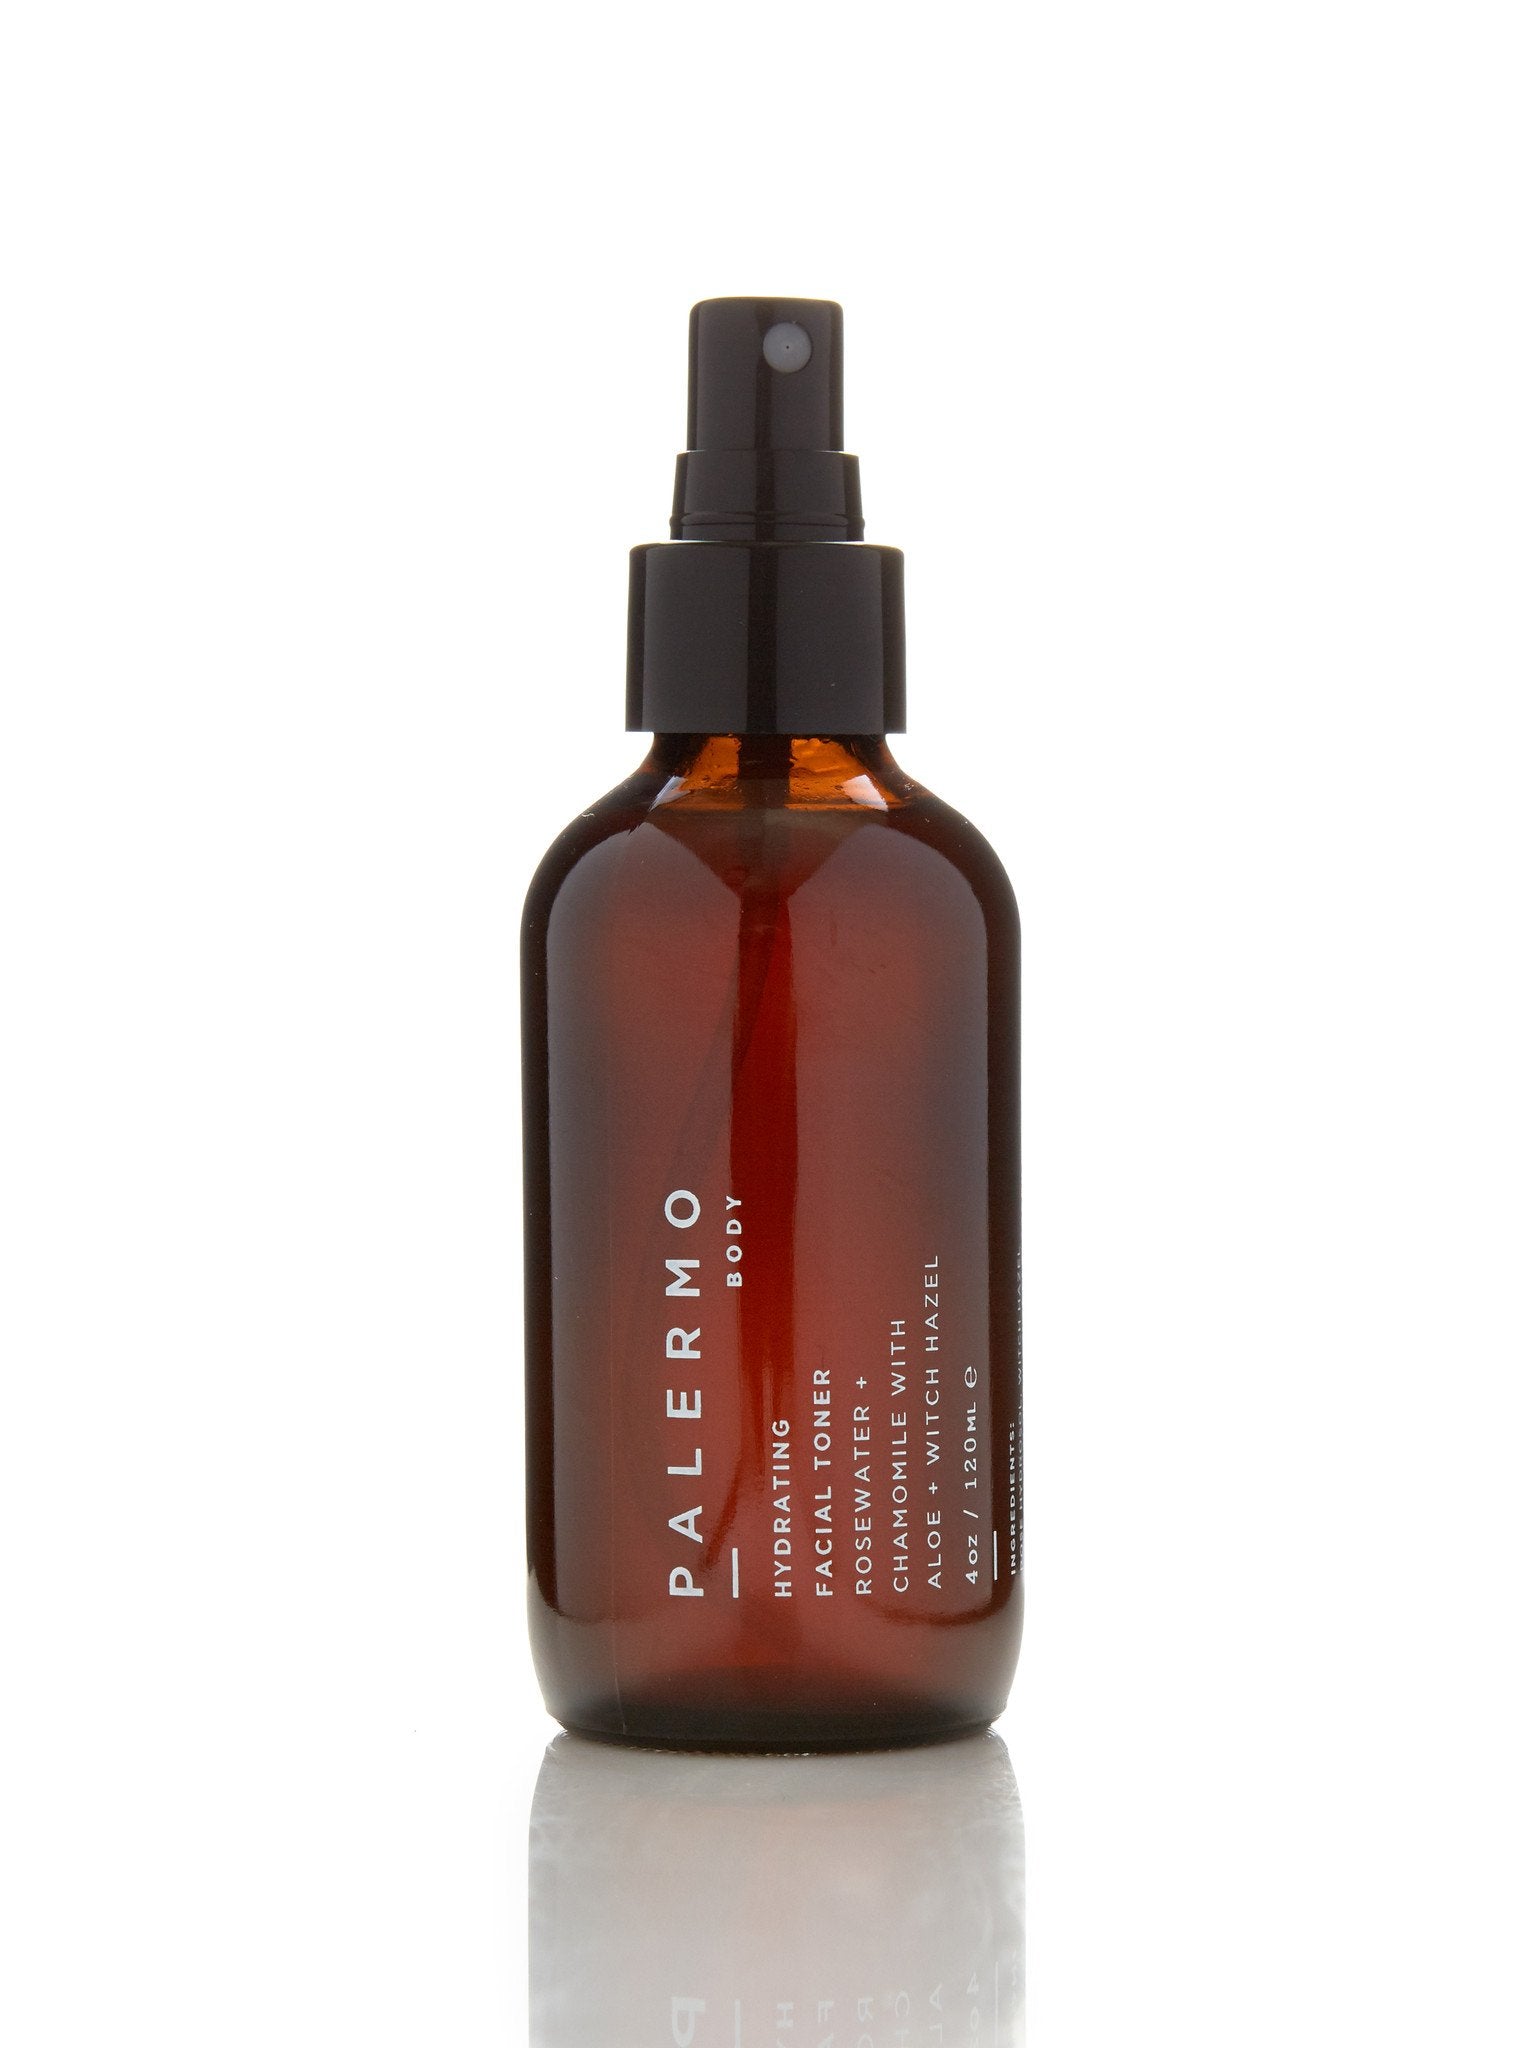 Witch Hazel Toner For Your Body - Into The Gloss